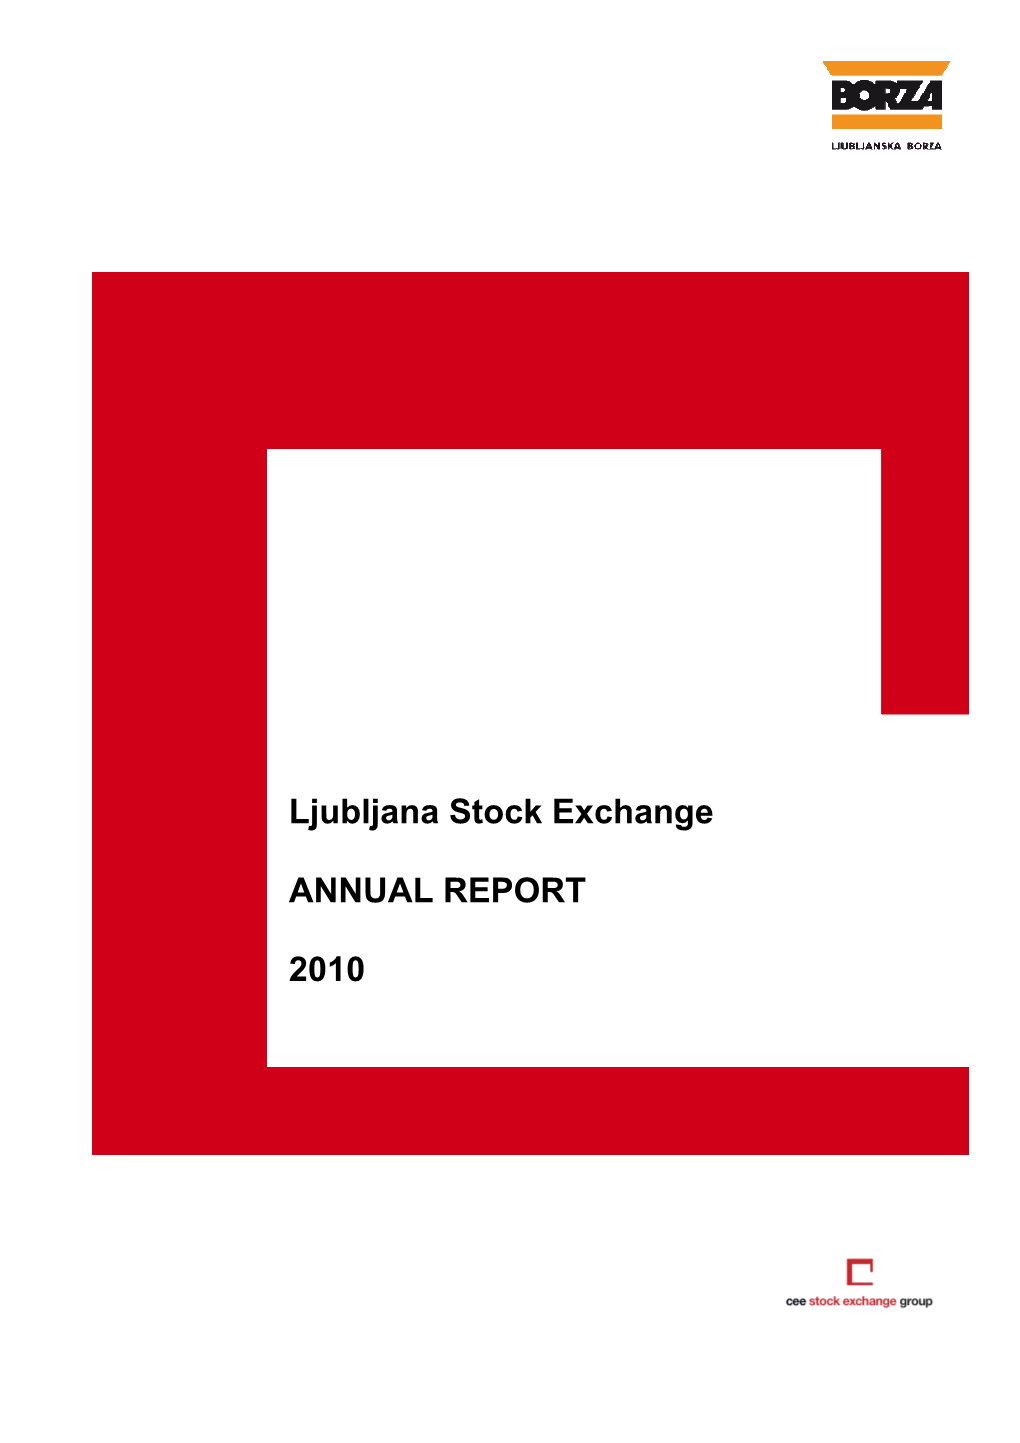 Ljubljana Stock Exchange Annual Report 2010 and the Auditor’S Report at Its Periodic Meeting on 22 March 2011